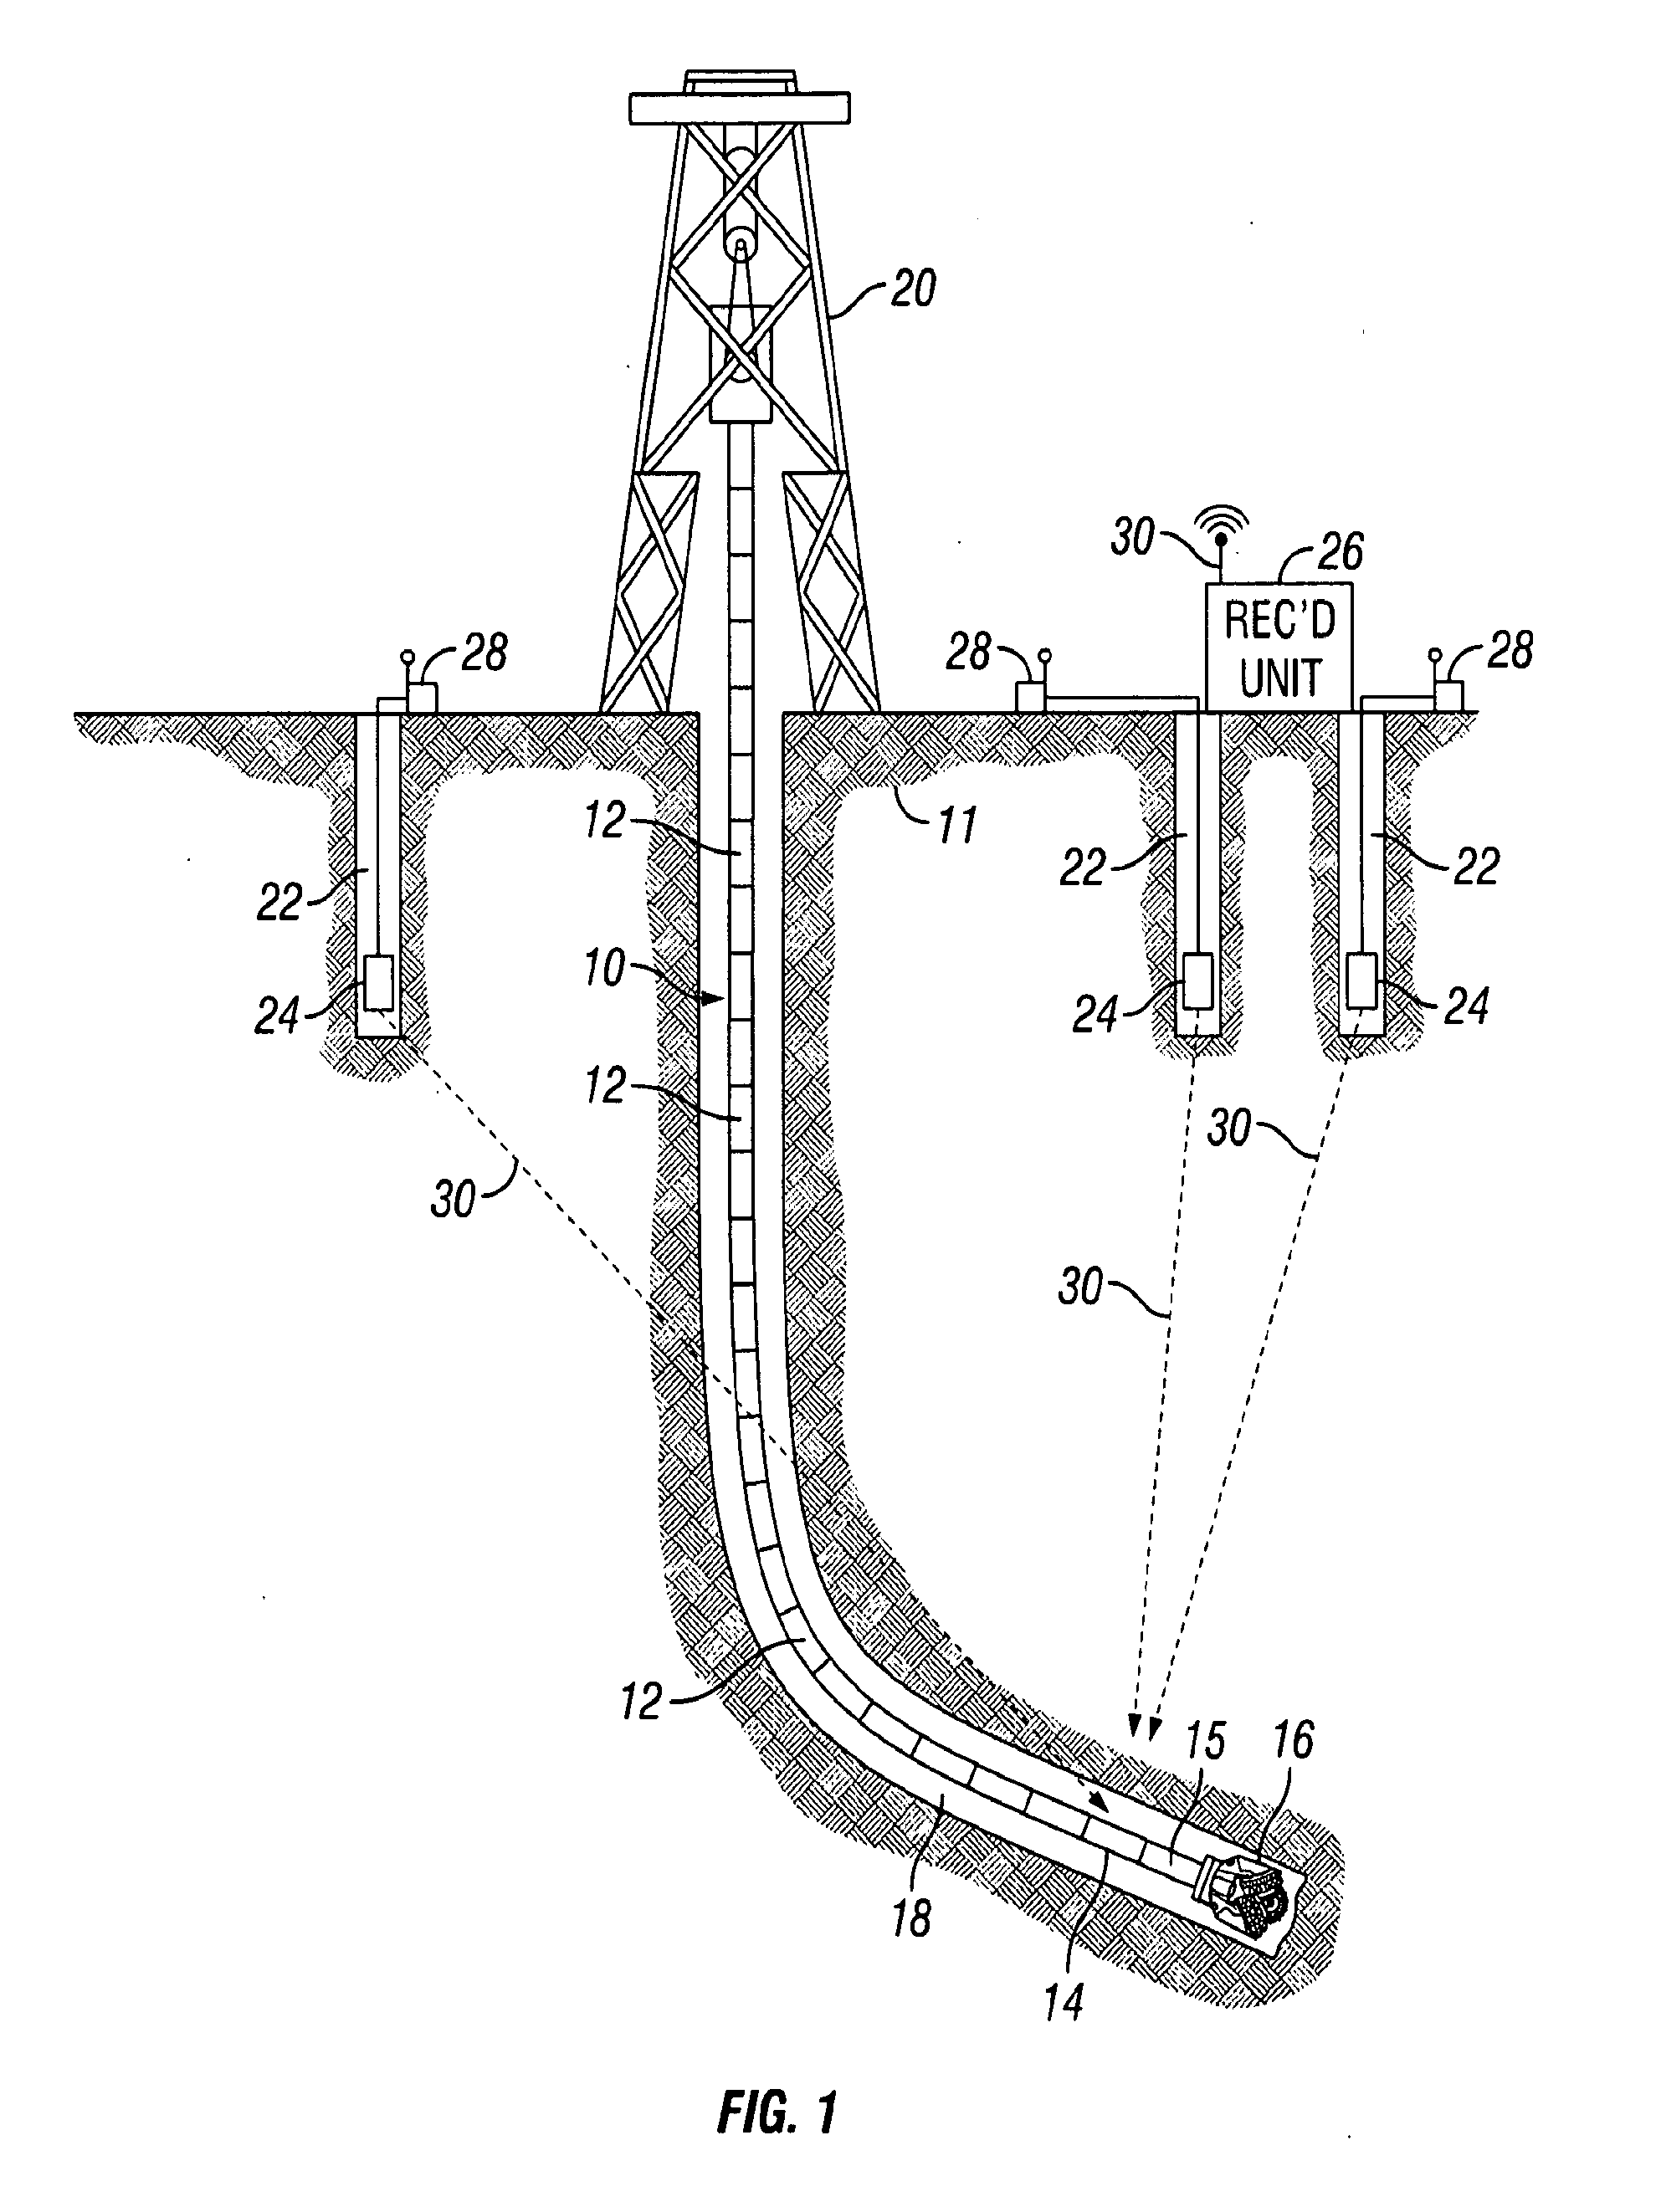 Method for determining wellbore position using seismic sources and seismic receivers